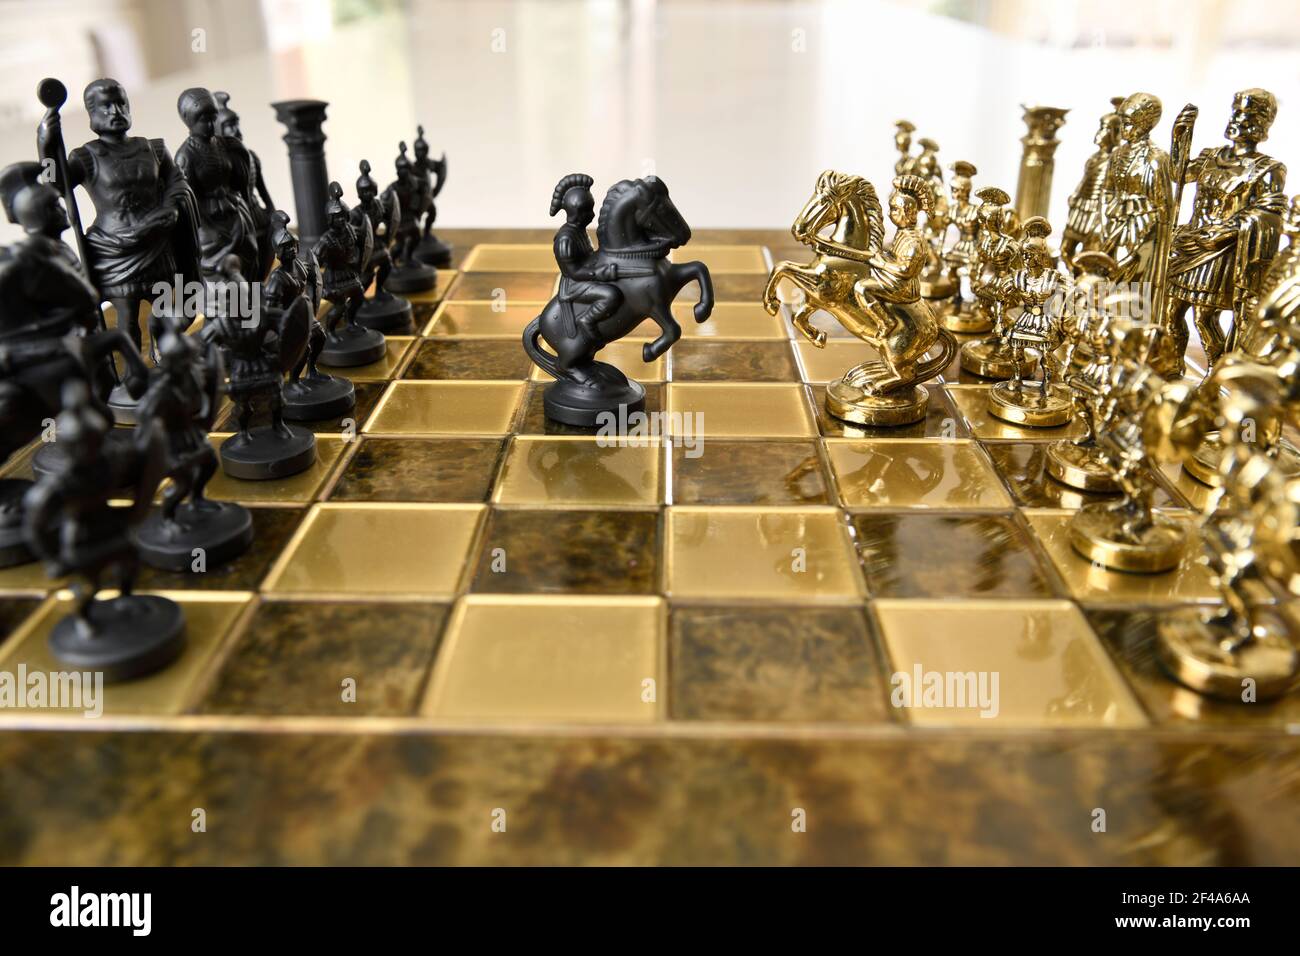 Black and gold metal knight chess figurines on horseback attacking on chessboard with opposing armies Stock Photo